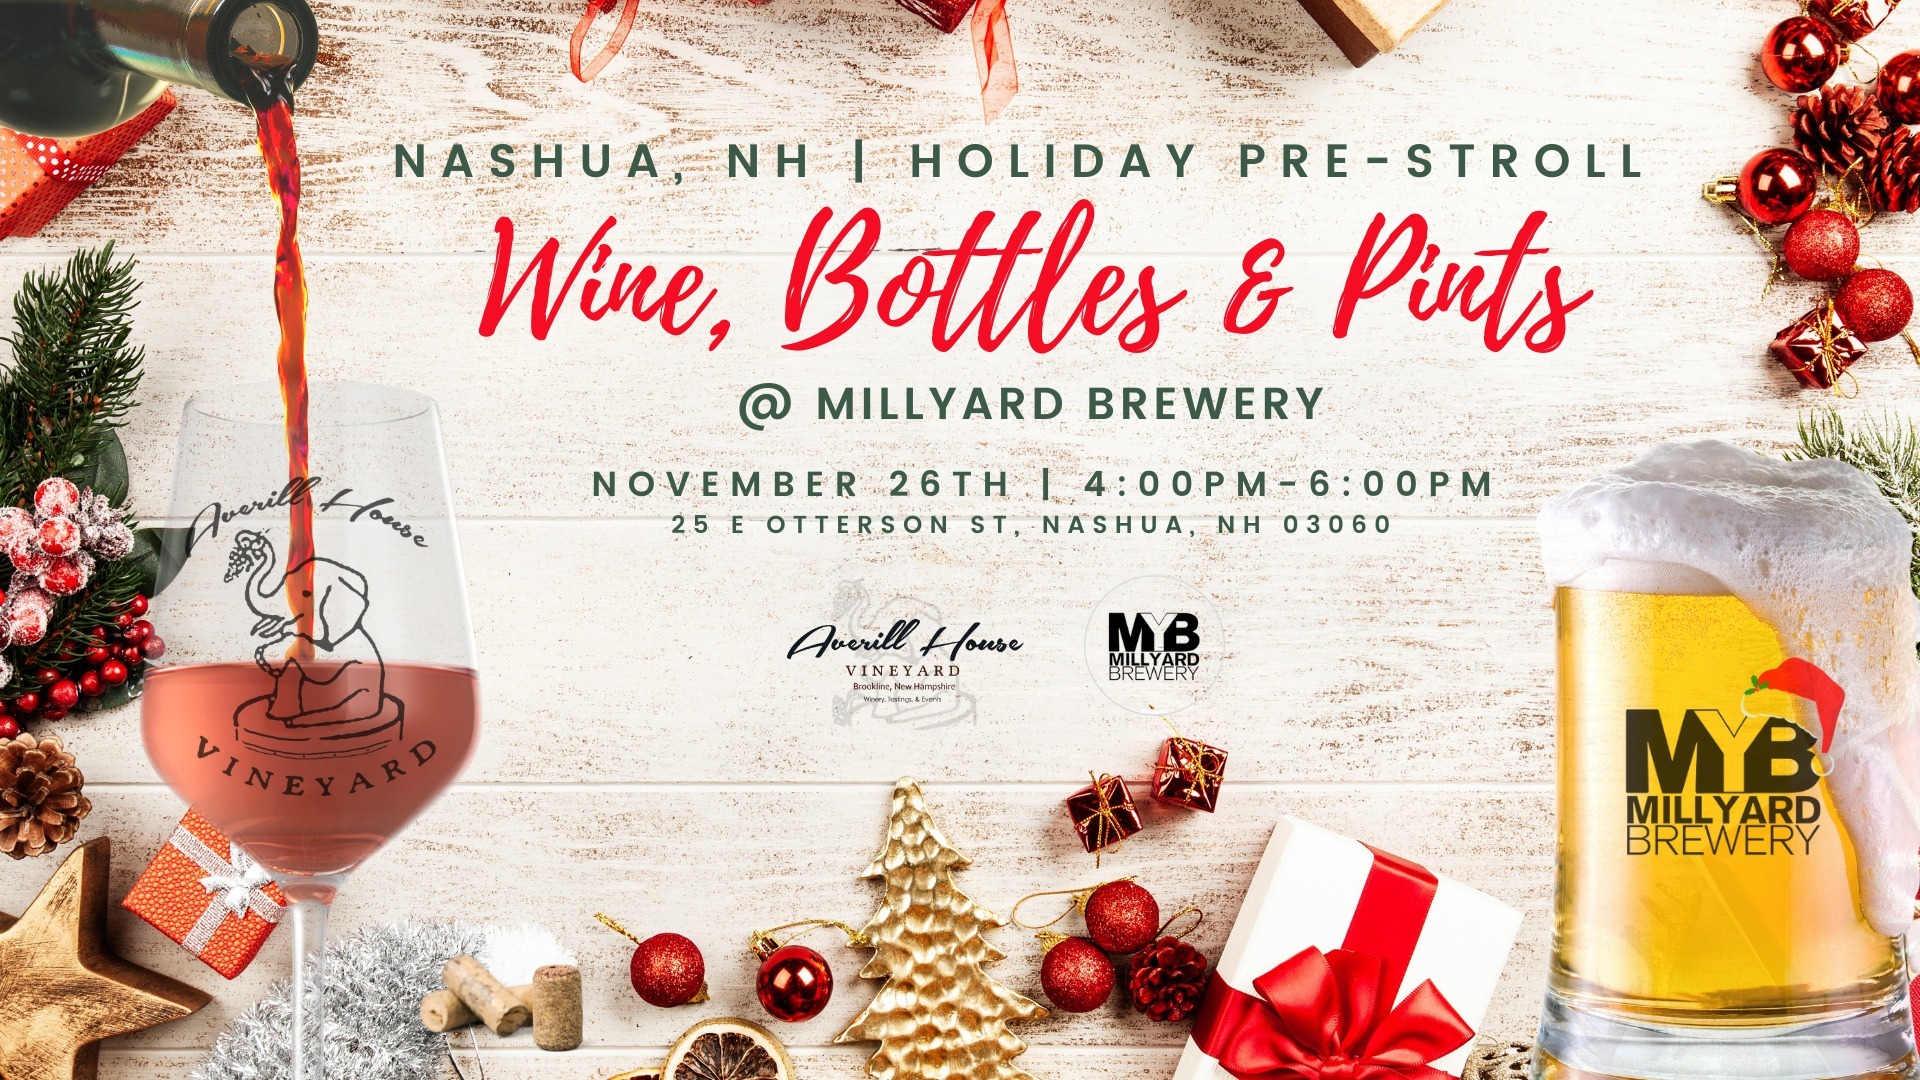 Wine and Pints | Holiday Pre-Stroll @Millyard Brewery, Nashua with Averill House Vineyard Friday 11/26, Nashua, New Hampshire, United States